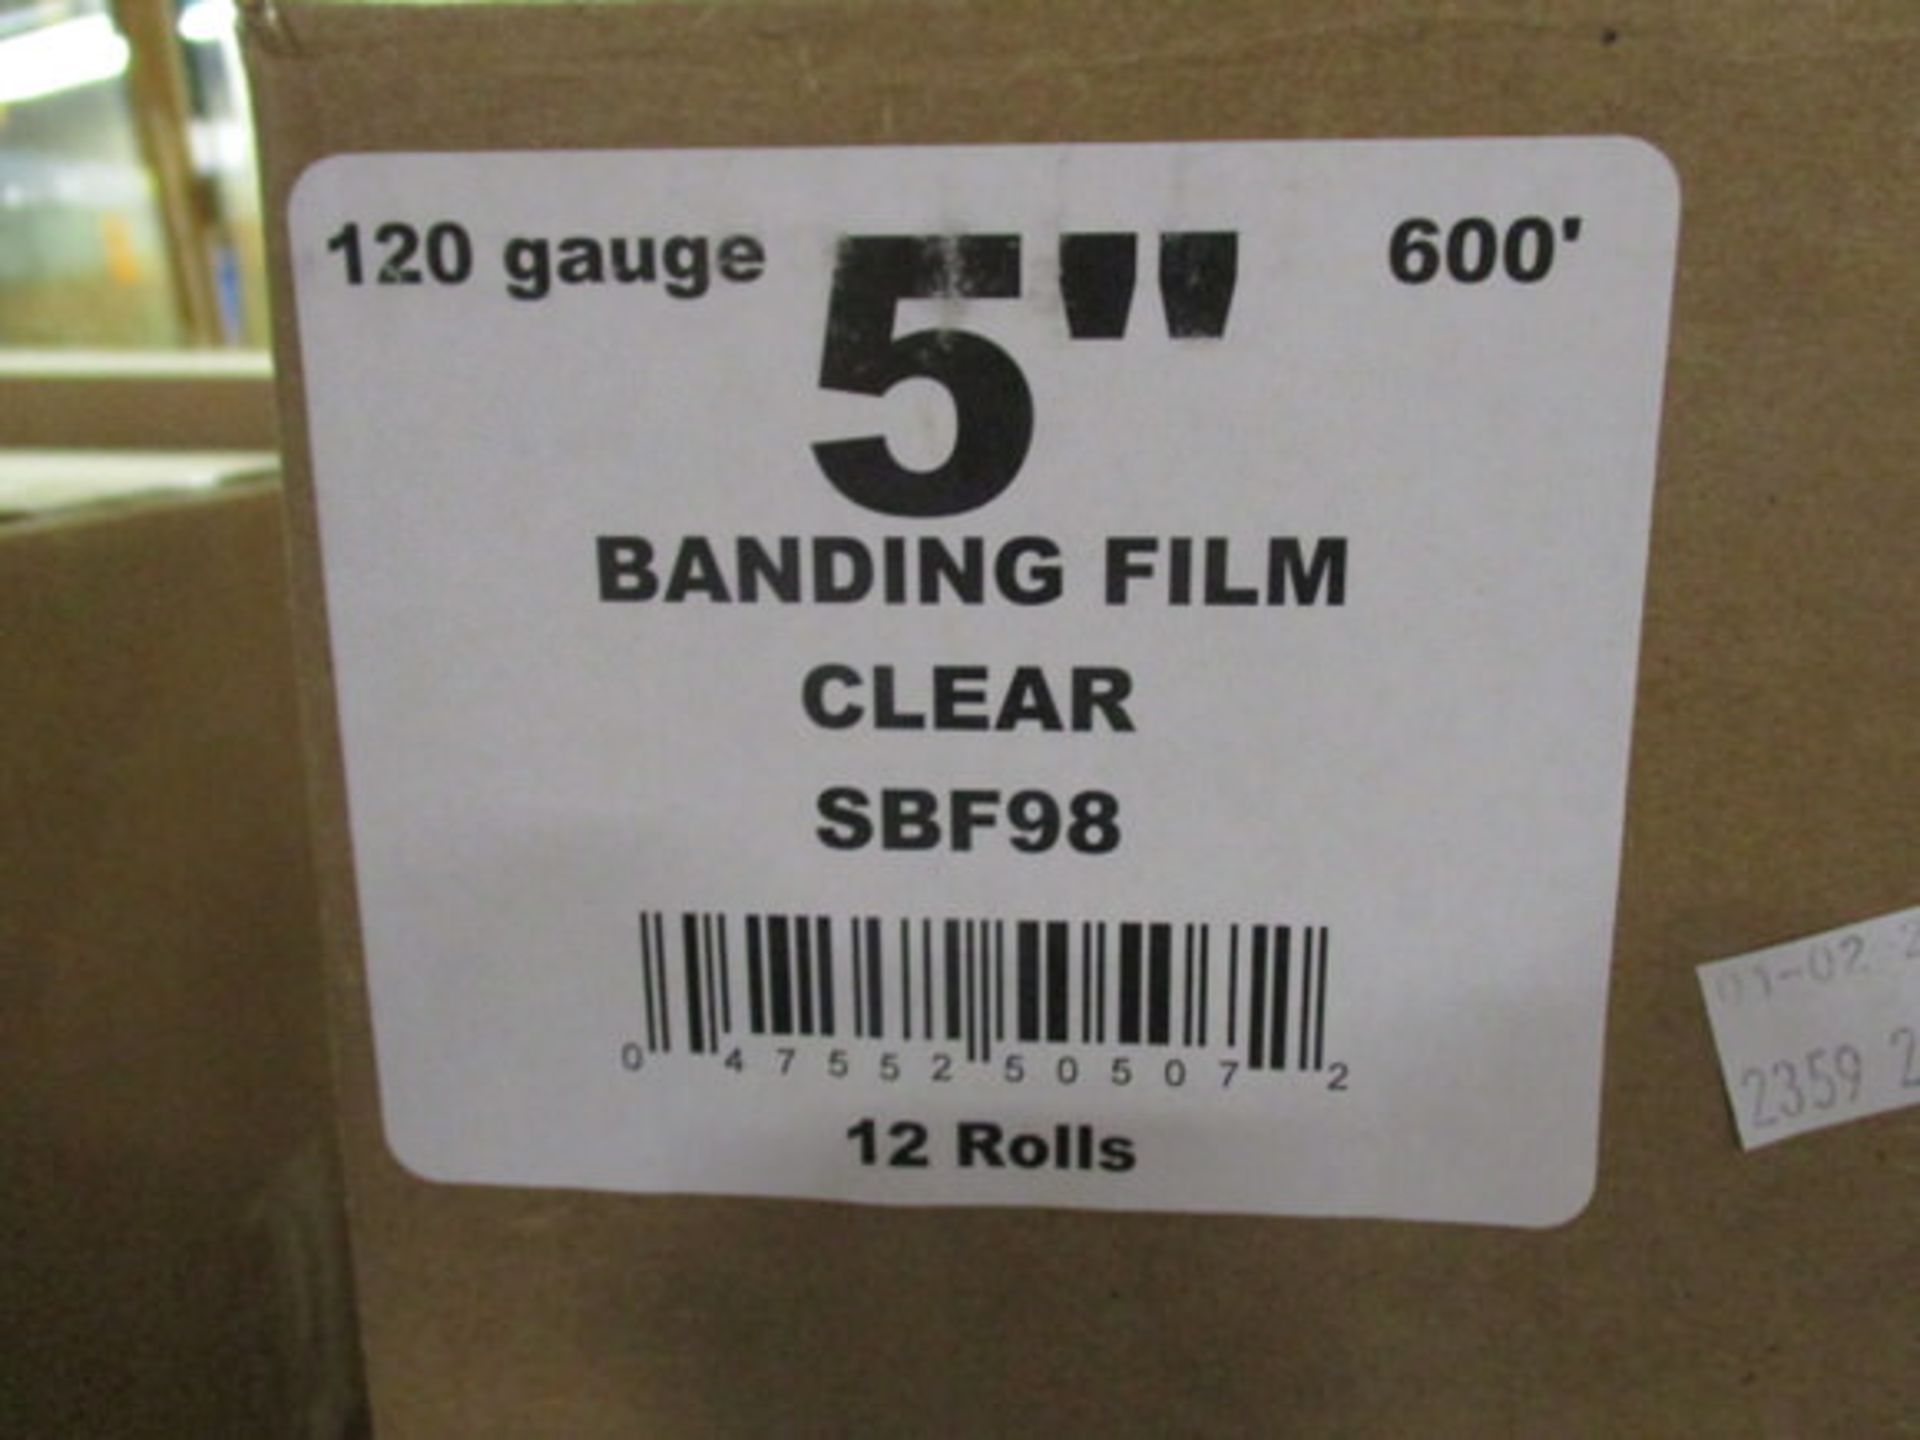 APPROX (21) CASES OF (12) ROLLS 5" BANDING FILM, 120 GA - Image 3 of 4